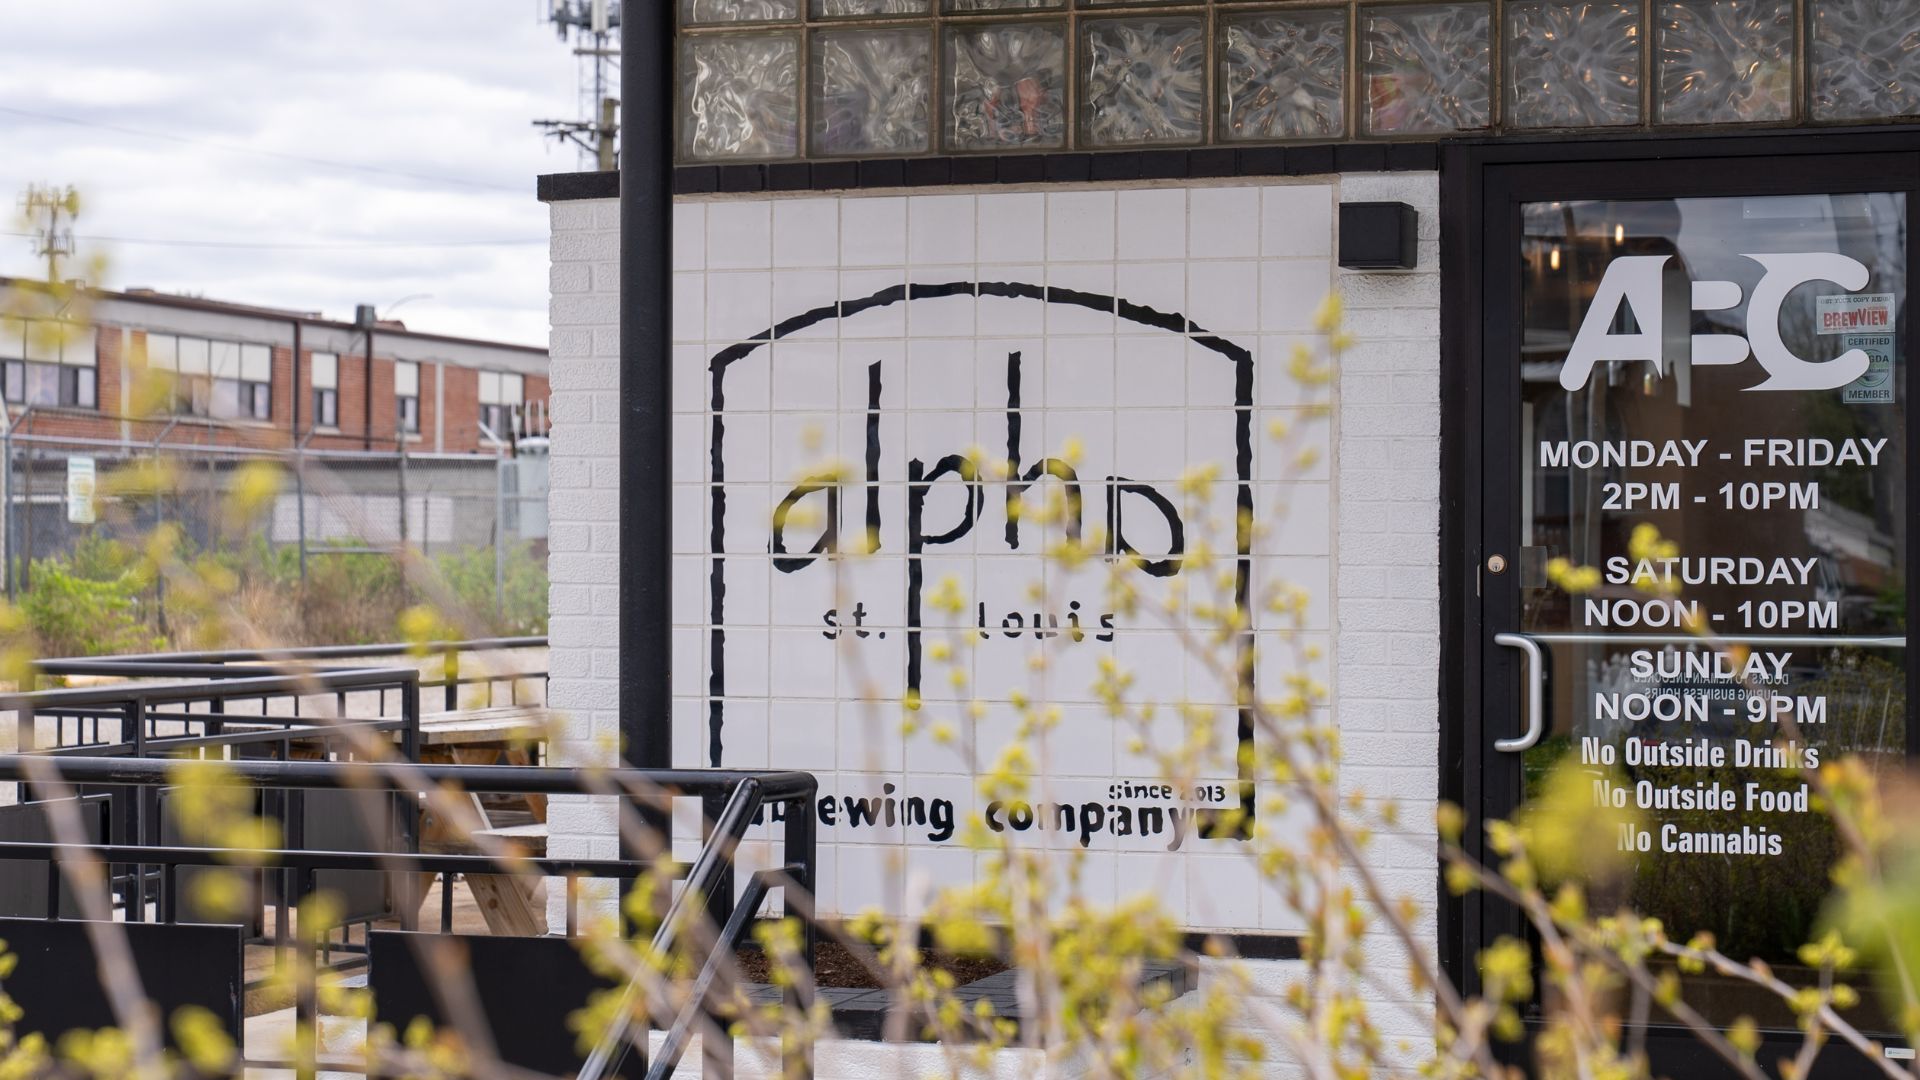 Alpha Brewing Company has a brewery and taproom on Fyler Avenue in St. Louis.